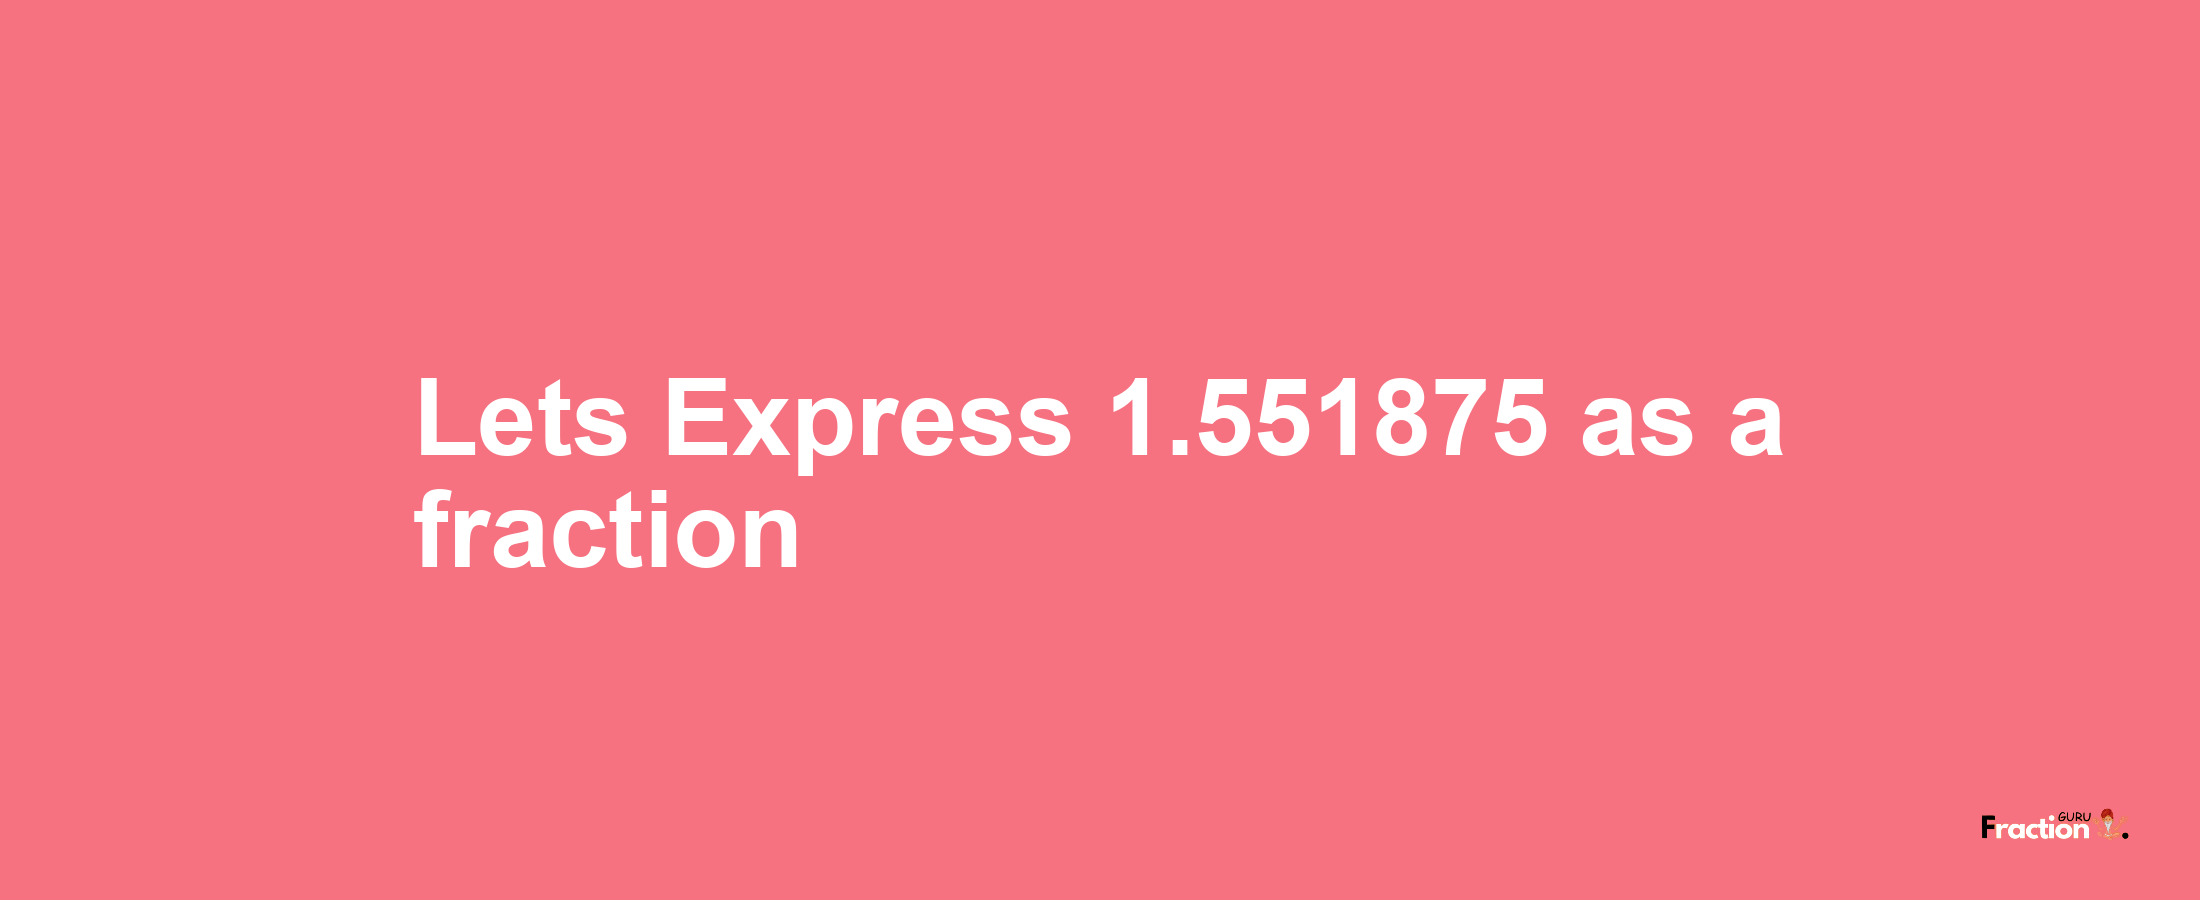 Lets Express 1.551875 as afraction